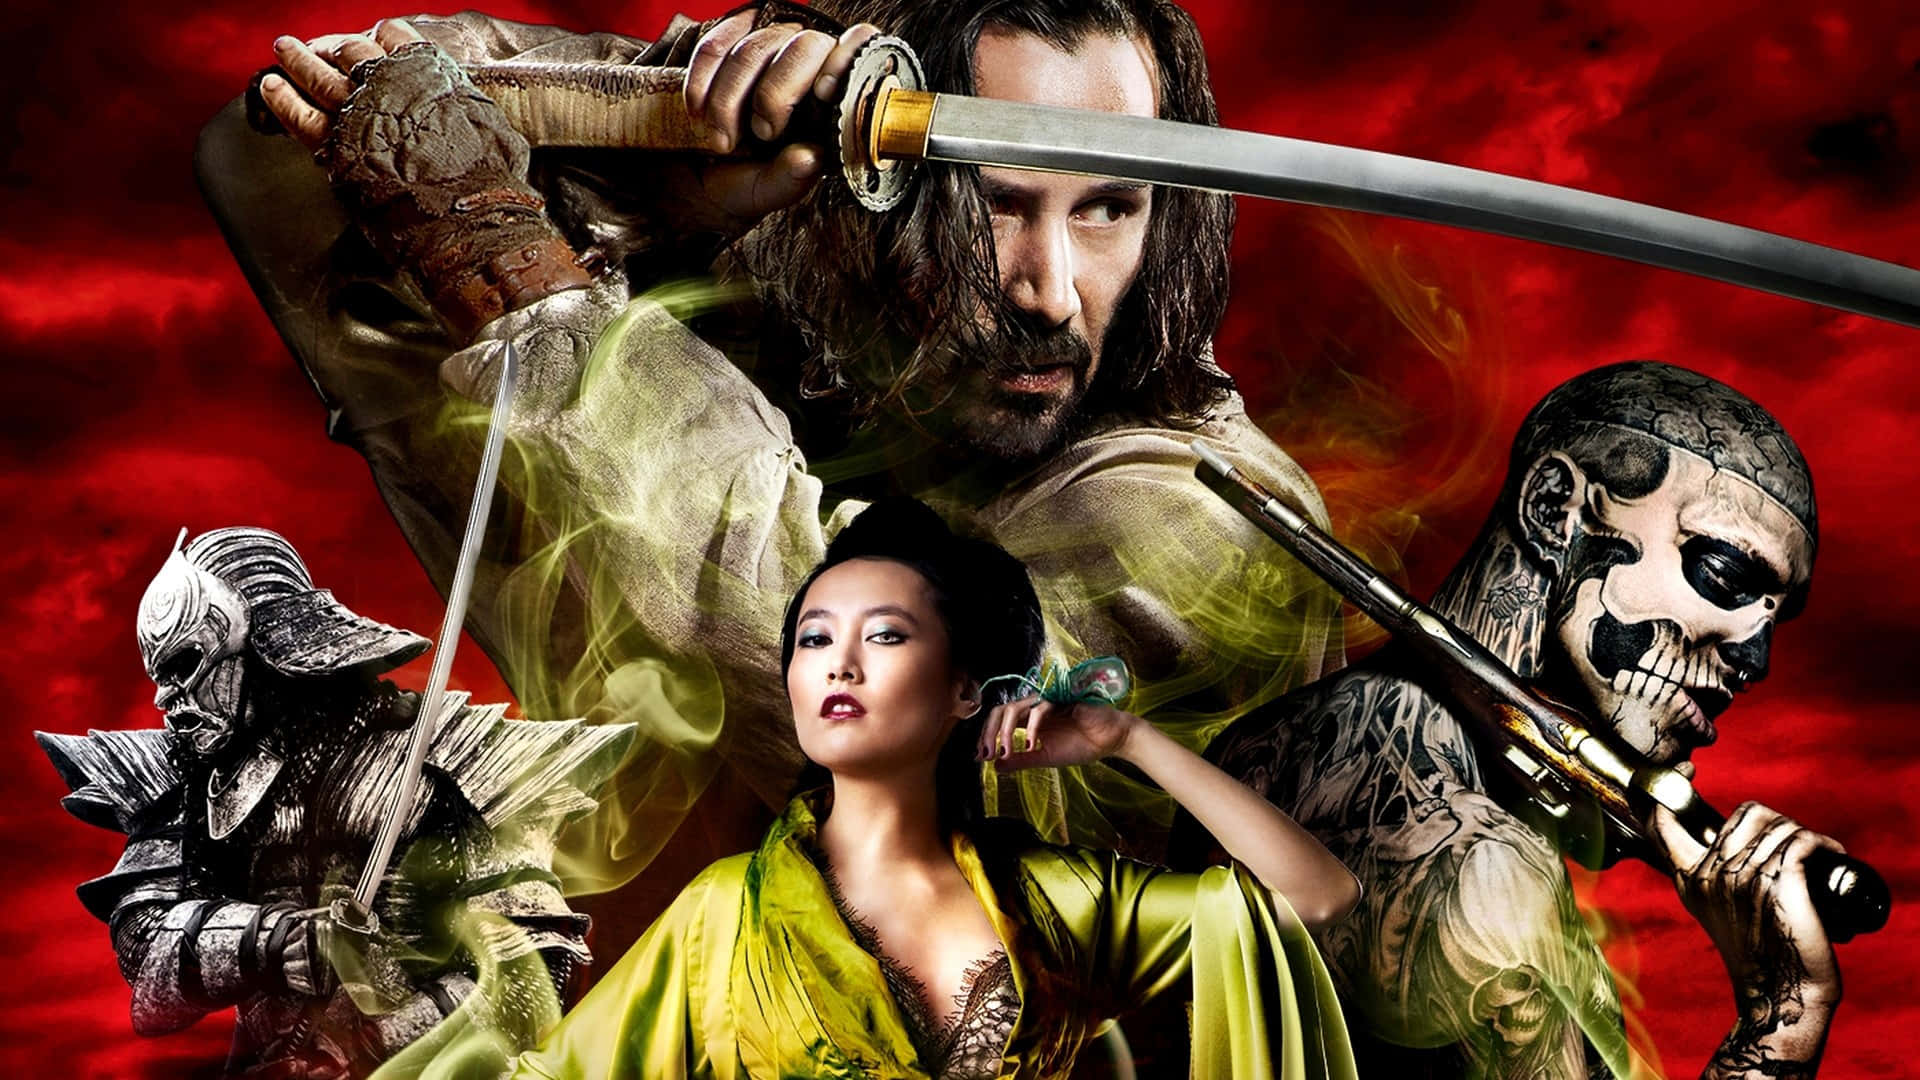 A thrilling scene from the epic movie 47 Ronin Wallpaper